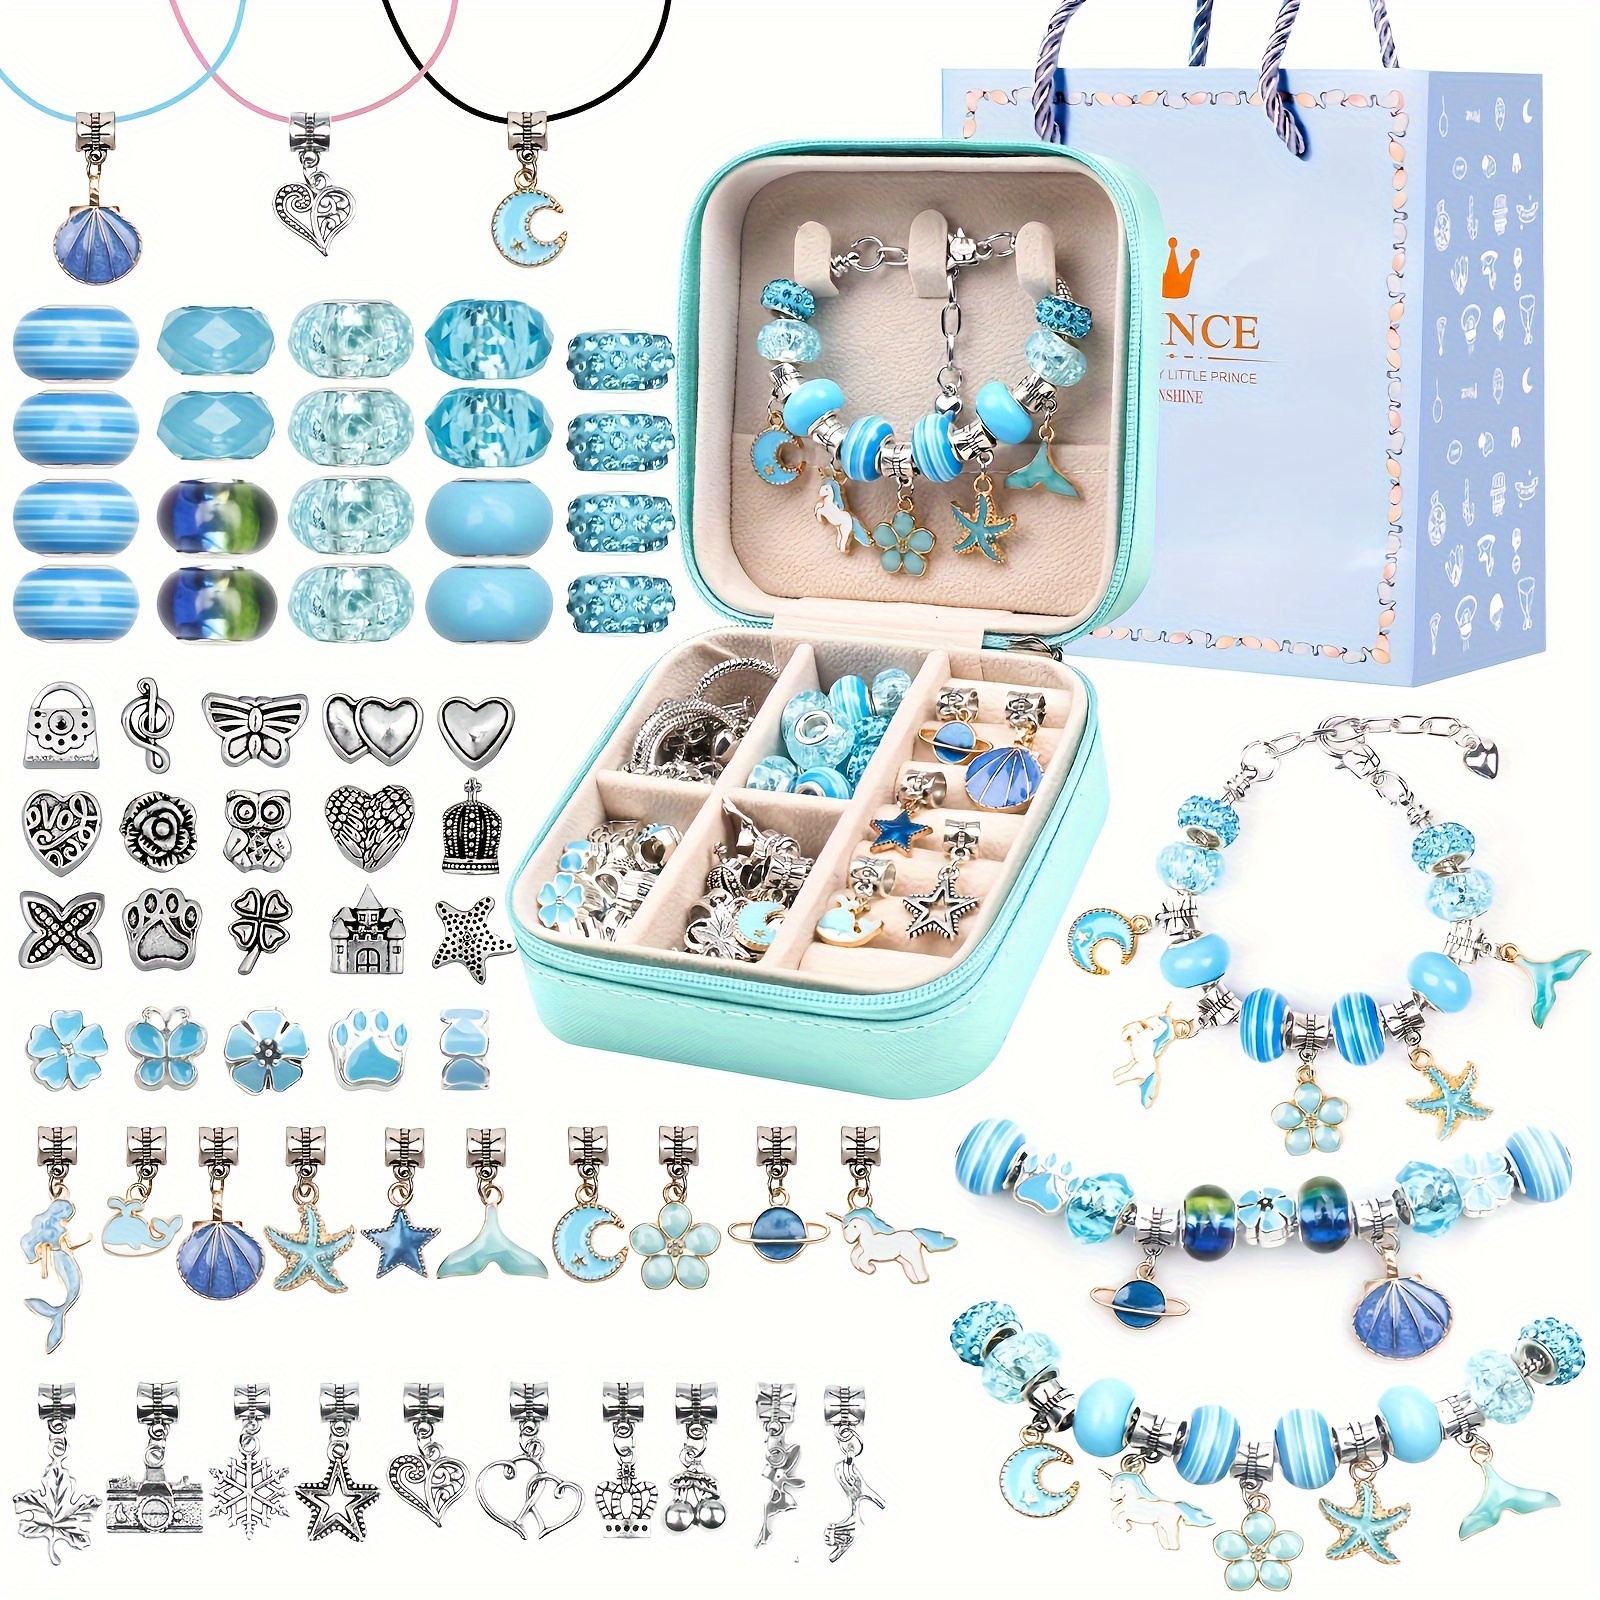 Charm Bracelet Making Kit, Charm Bracelet Making Kit Jewelry Making Supplies,  Gift Boxed Charm Bracelet Girl Diy Craft Gift Kit For Teen Girls Crafts